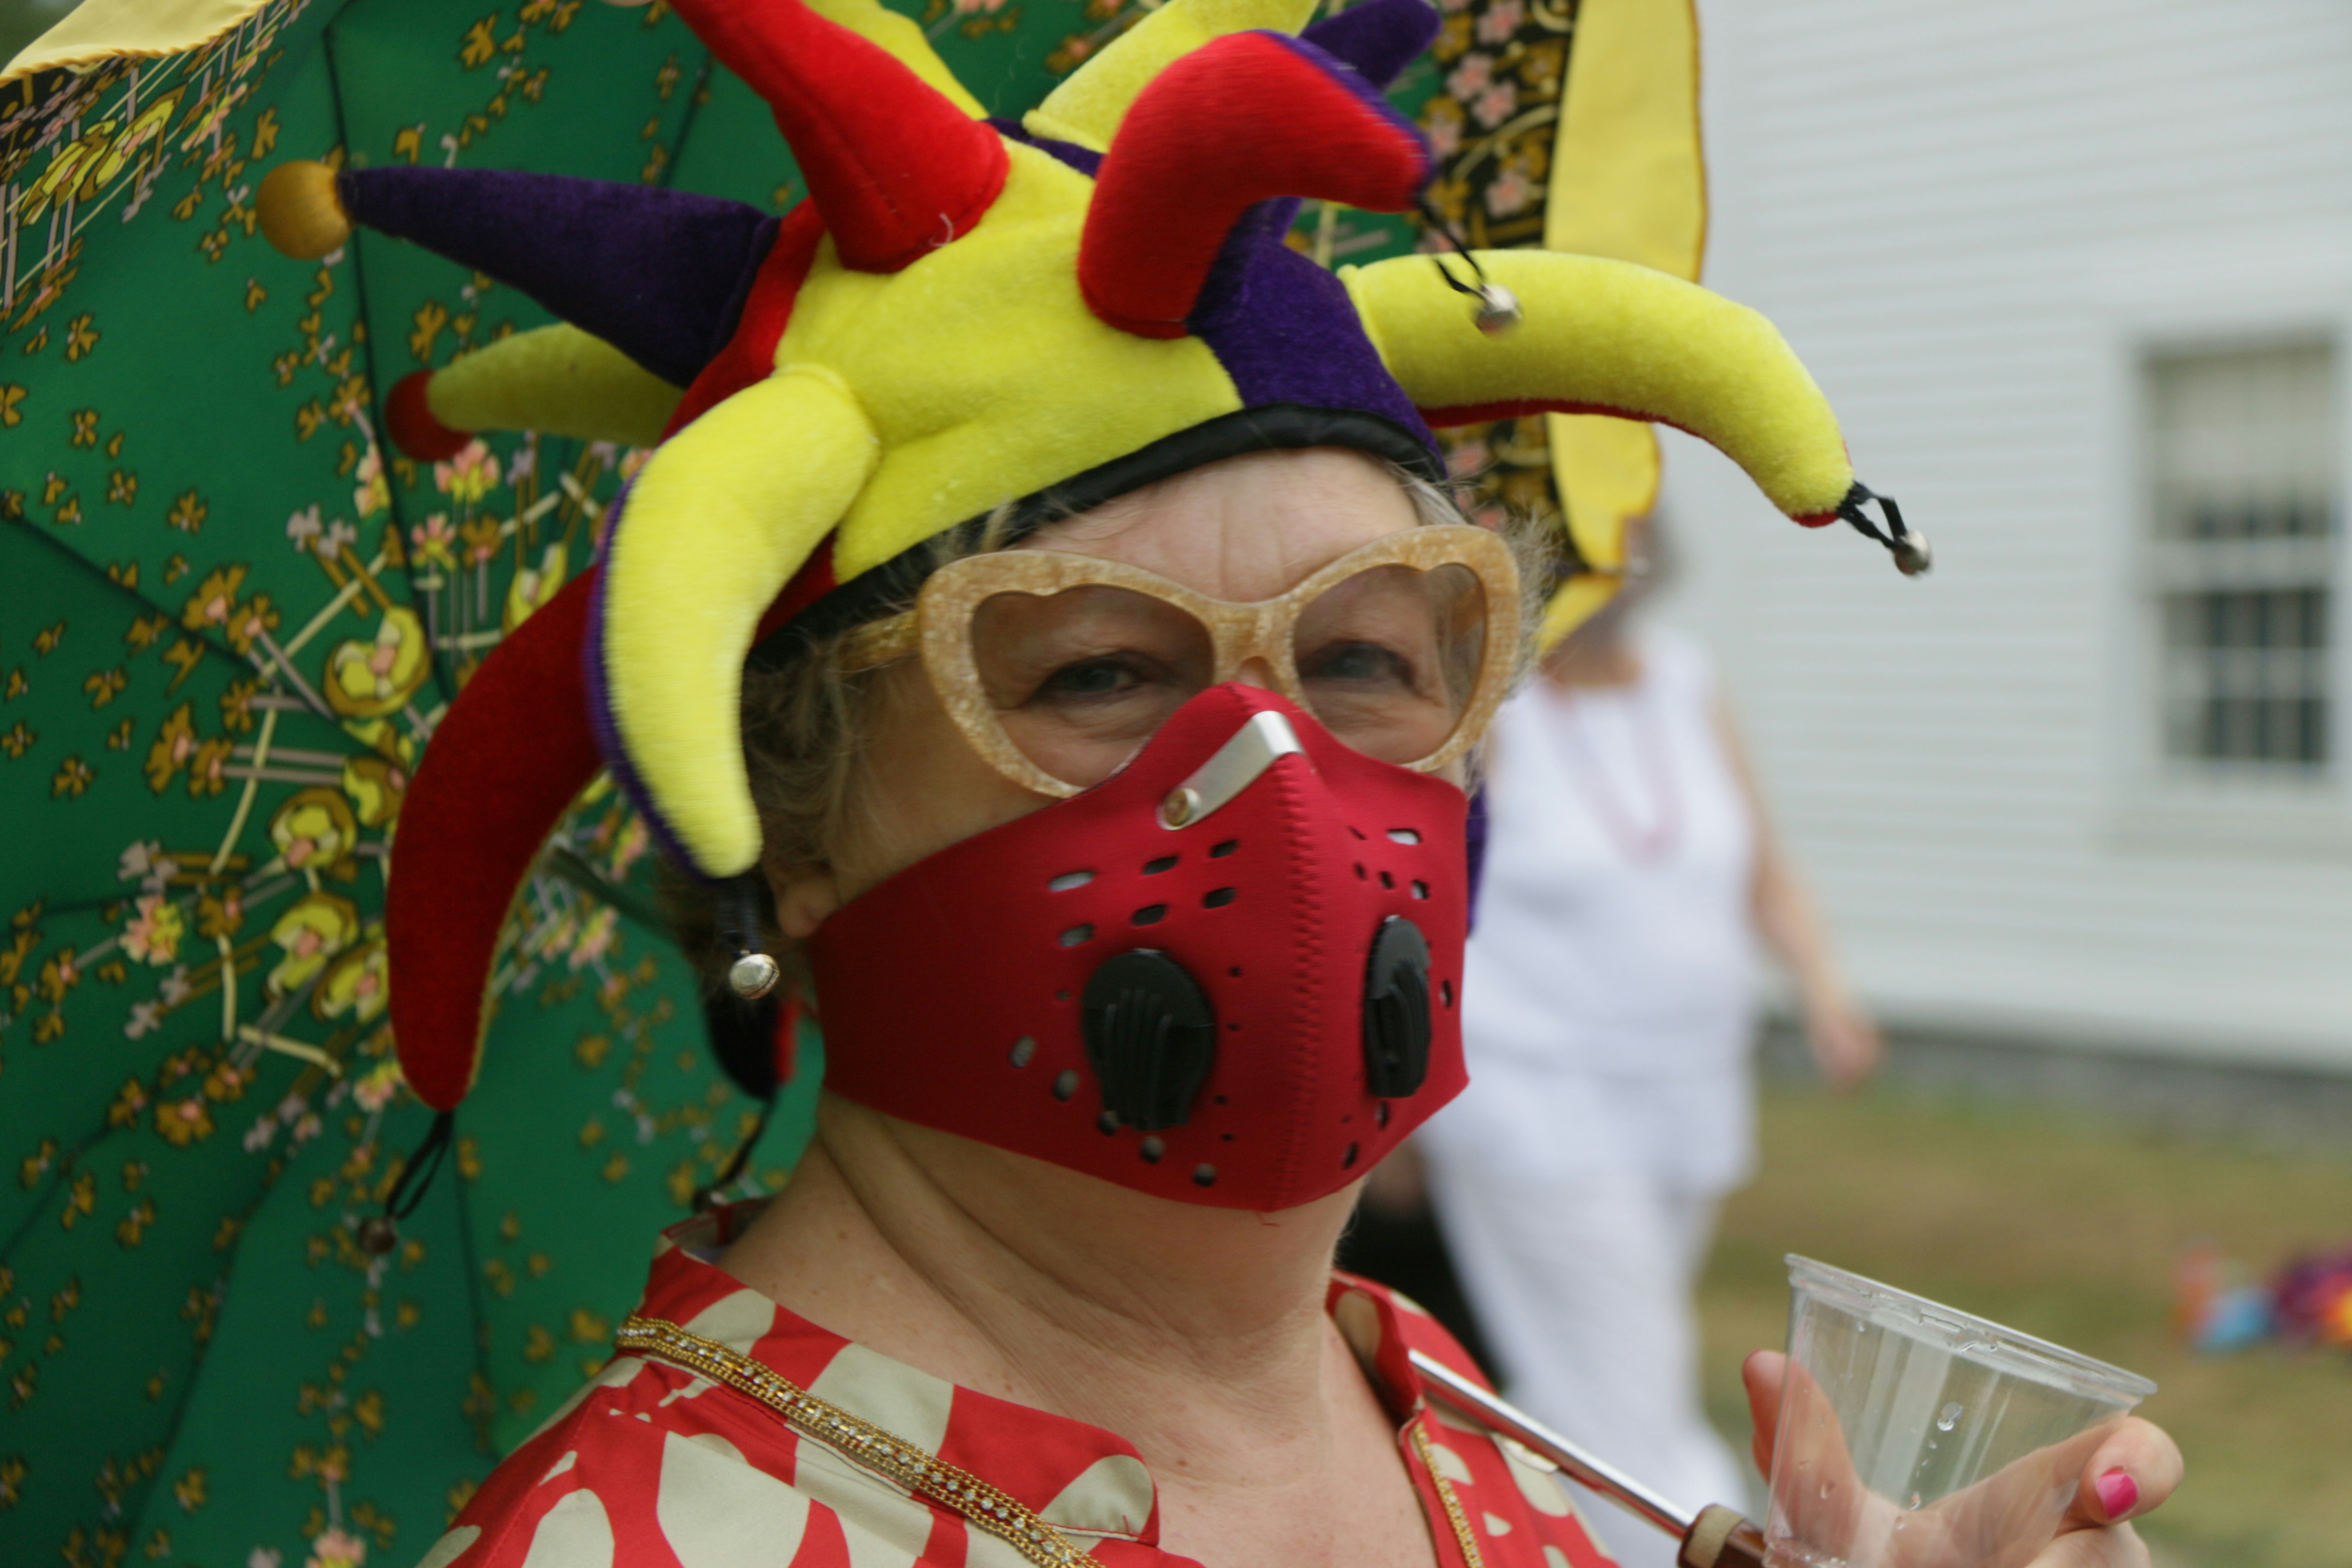 Covid Masks Socially Distanced Outdoors. Wearing colorful red mask and silly headwear.